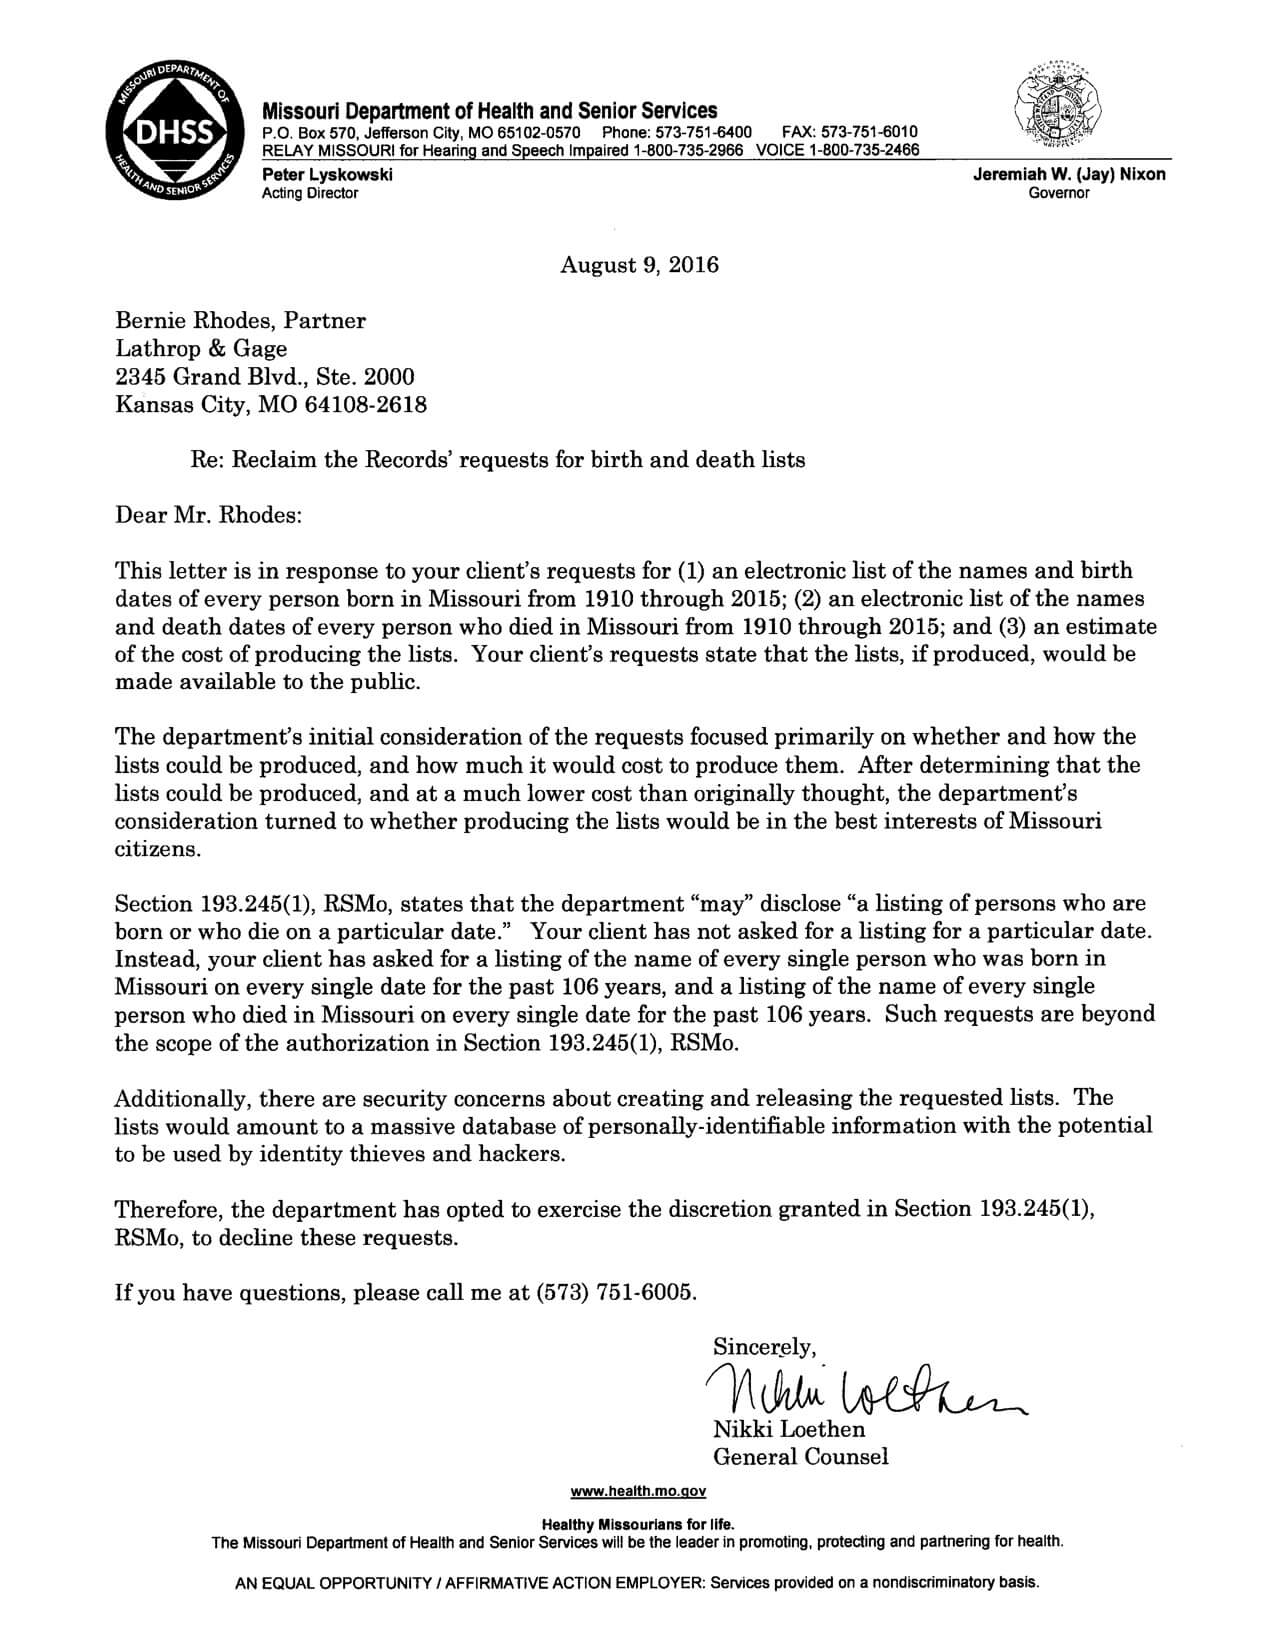 LETTER FROM MISSOURI DEPT OF HEALTH AND SENIOR SERVICES TO RECLAIM THE RECORDS (AUGUST 9, 2016)